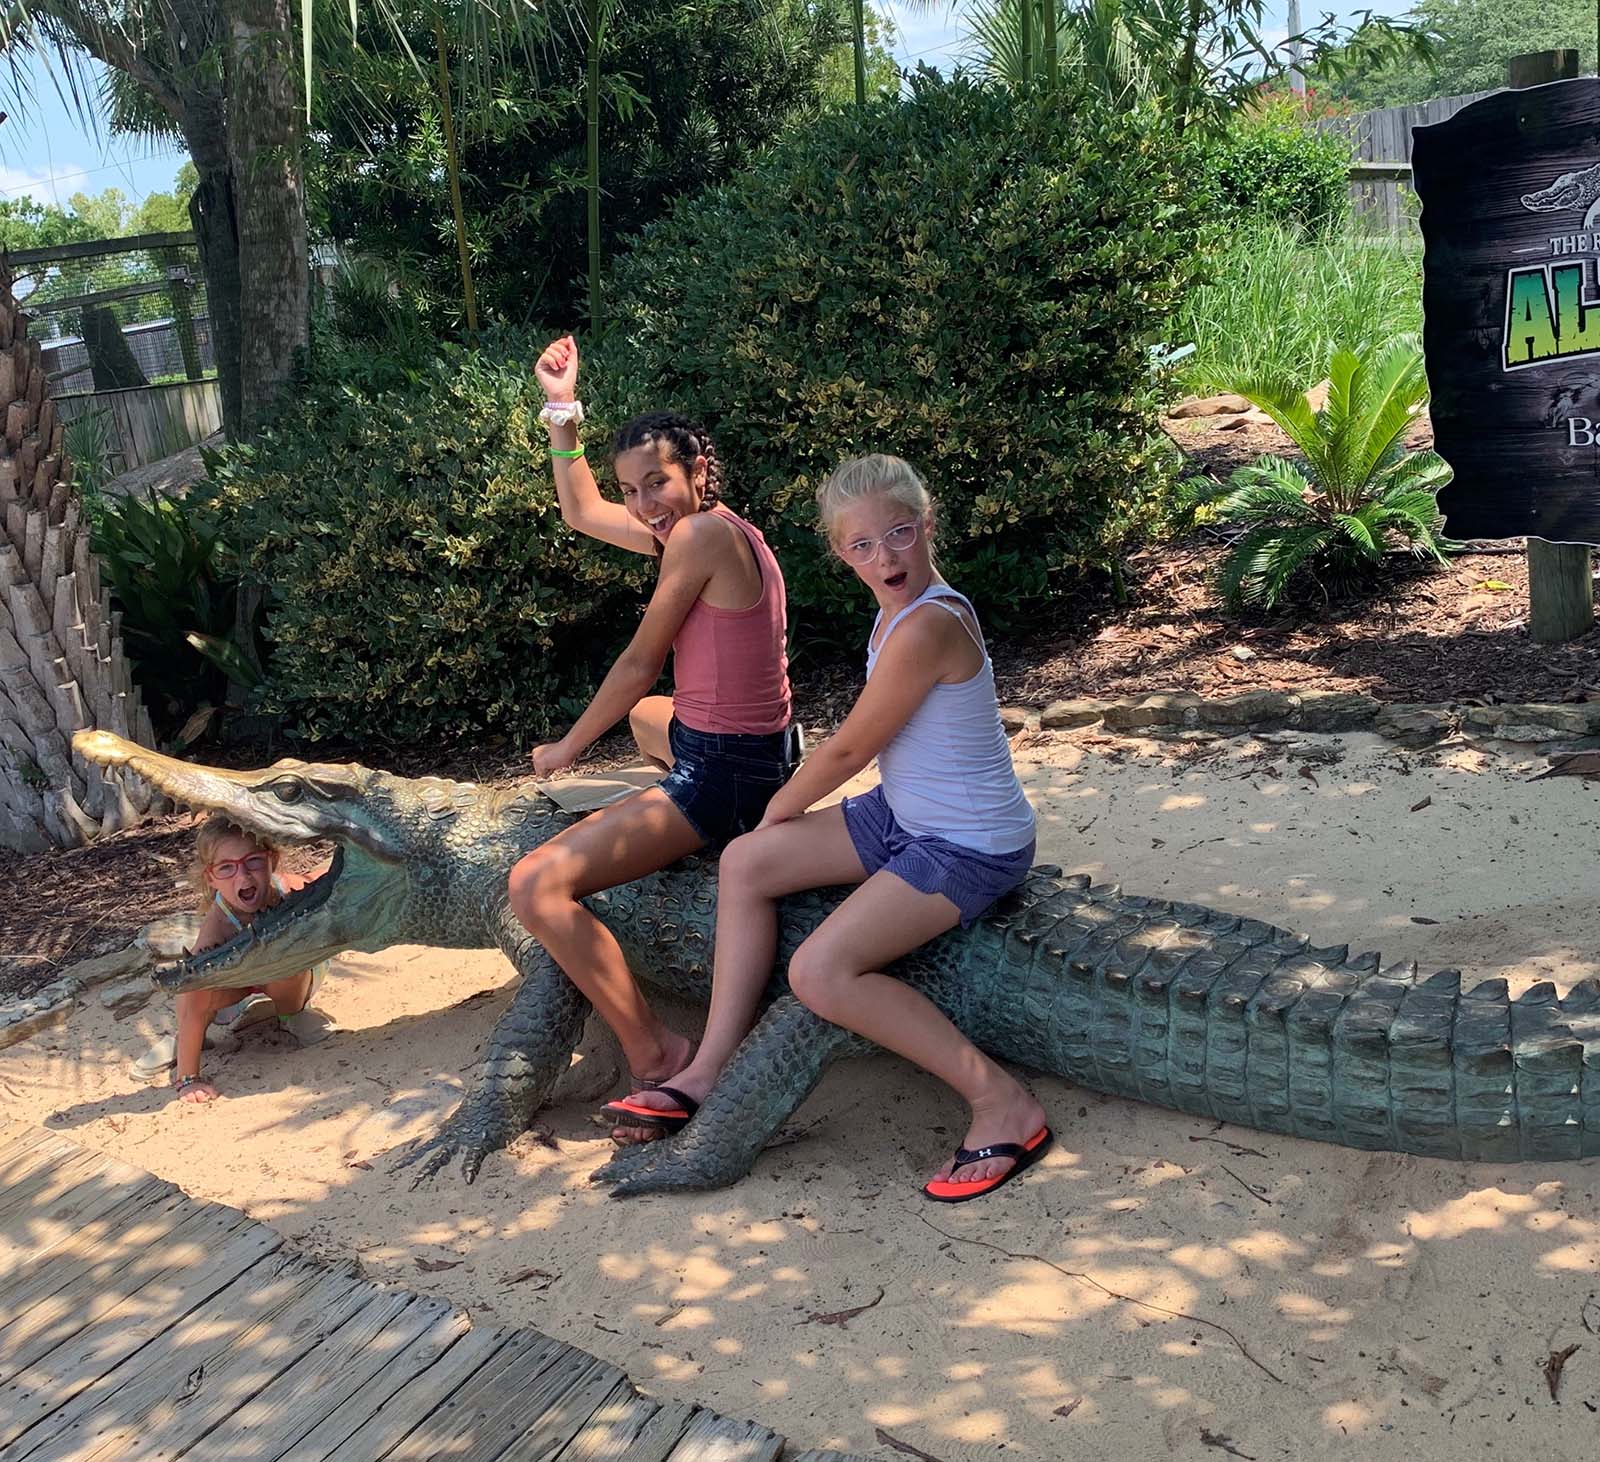 A couple riding an alligator in Myrtle Beach,SC